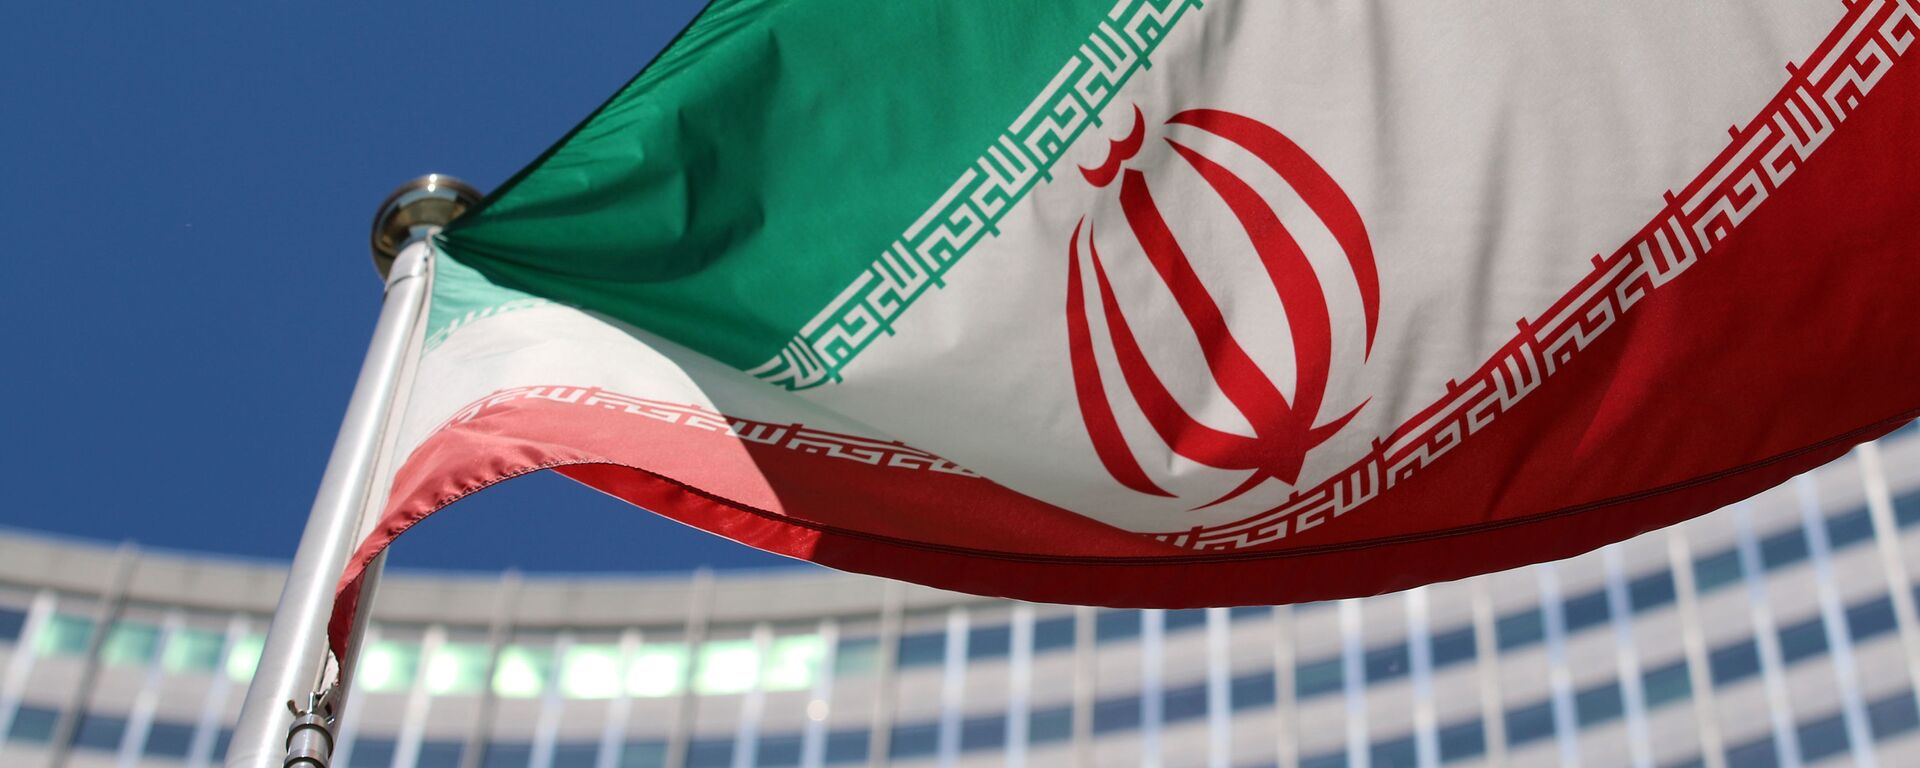 The Iranian flag flies in front of a UN building where closed-door nuclear talks take place at the International Center in Vienna, Austria, Wednesday, 18 June 2014 - Sputnik International, 1920, 04.04.2021